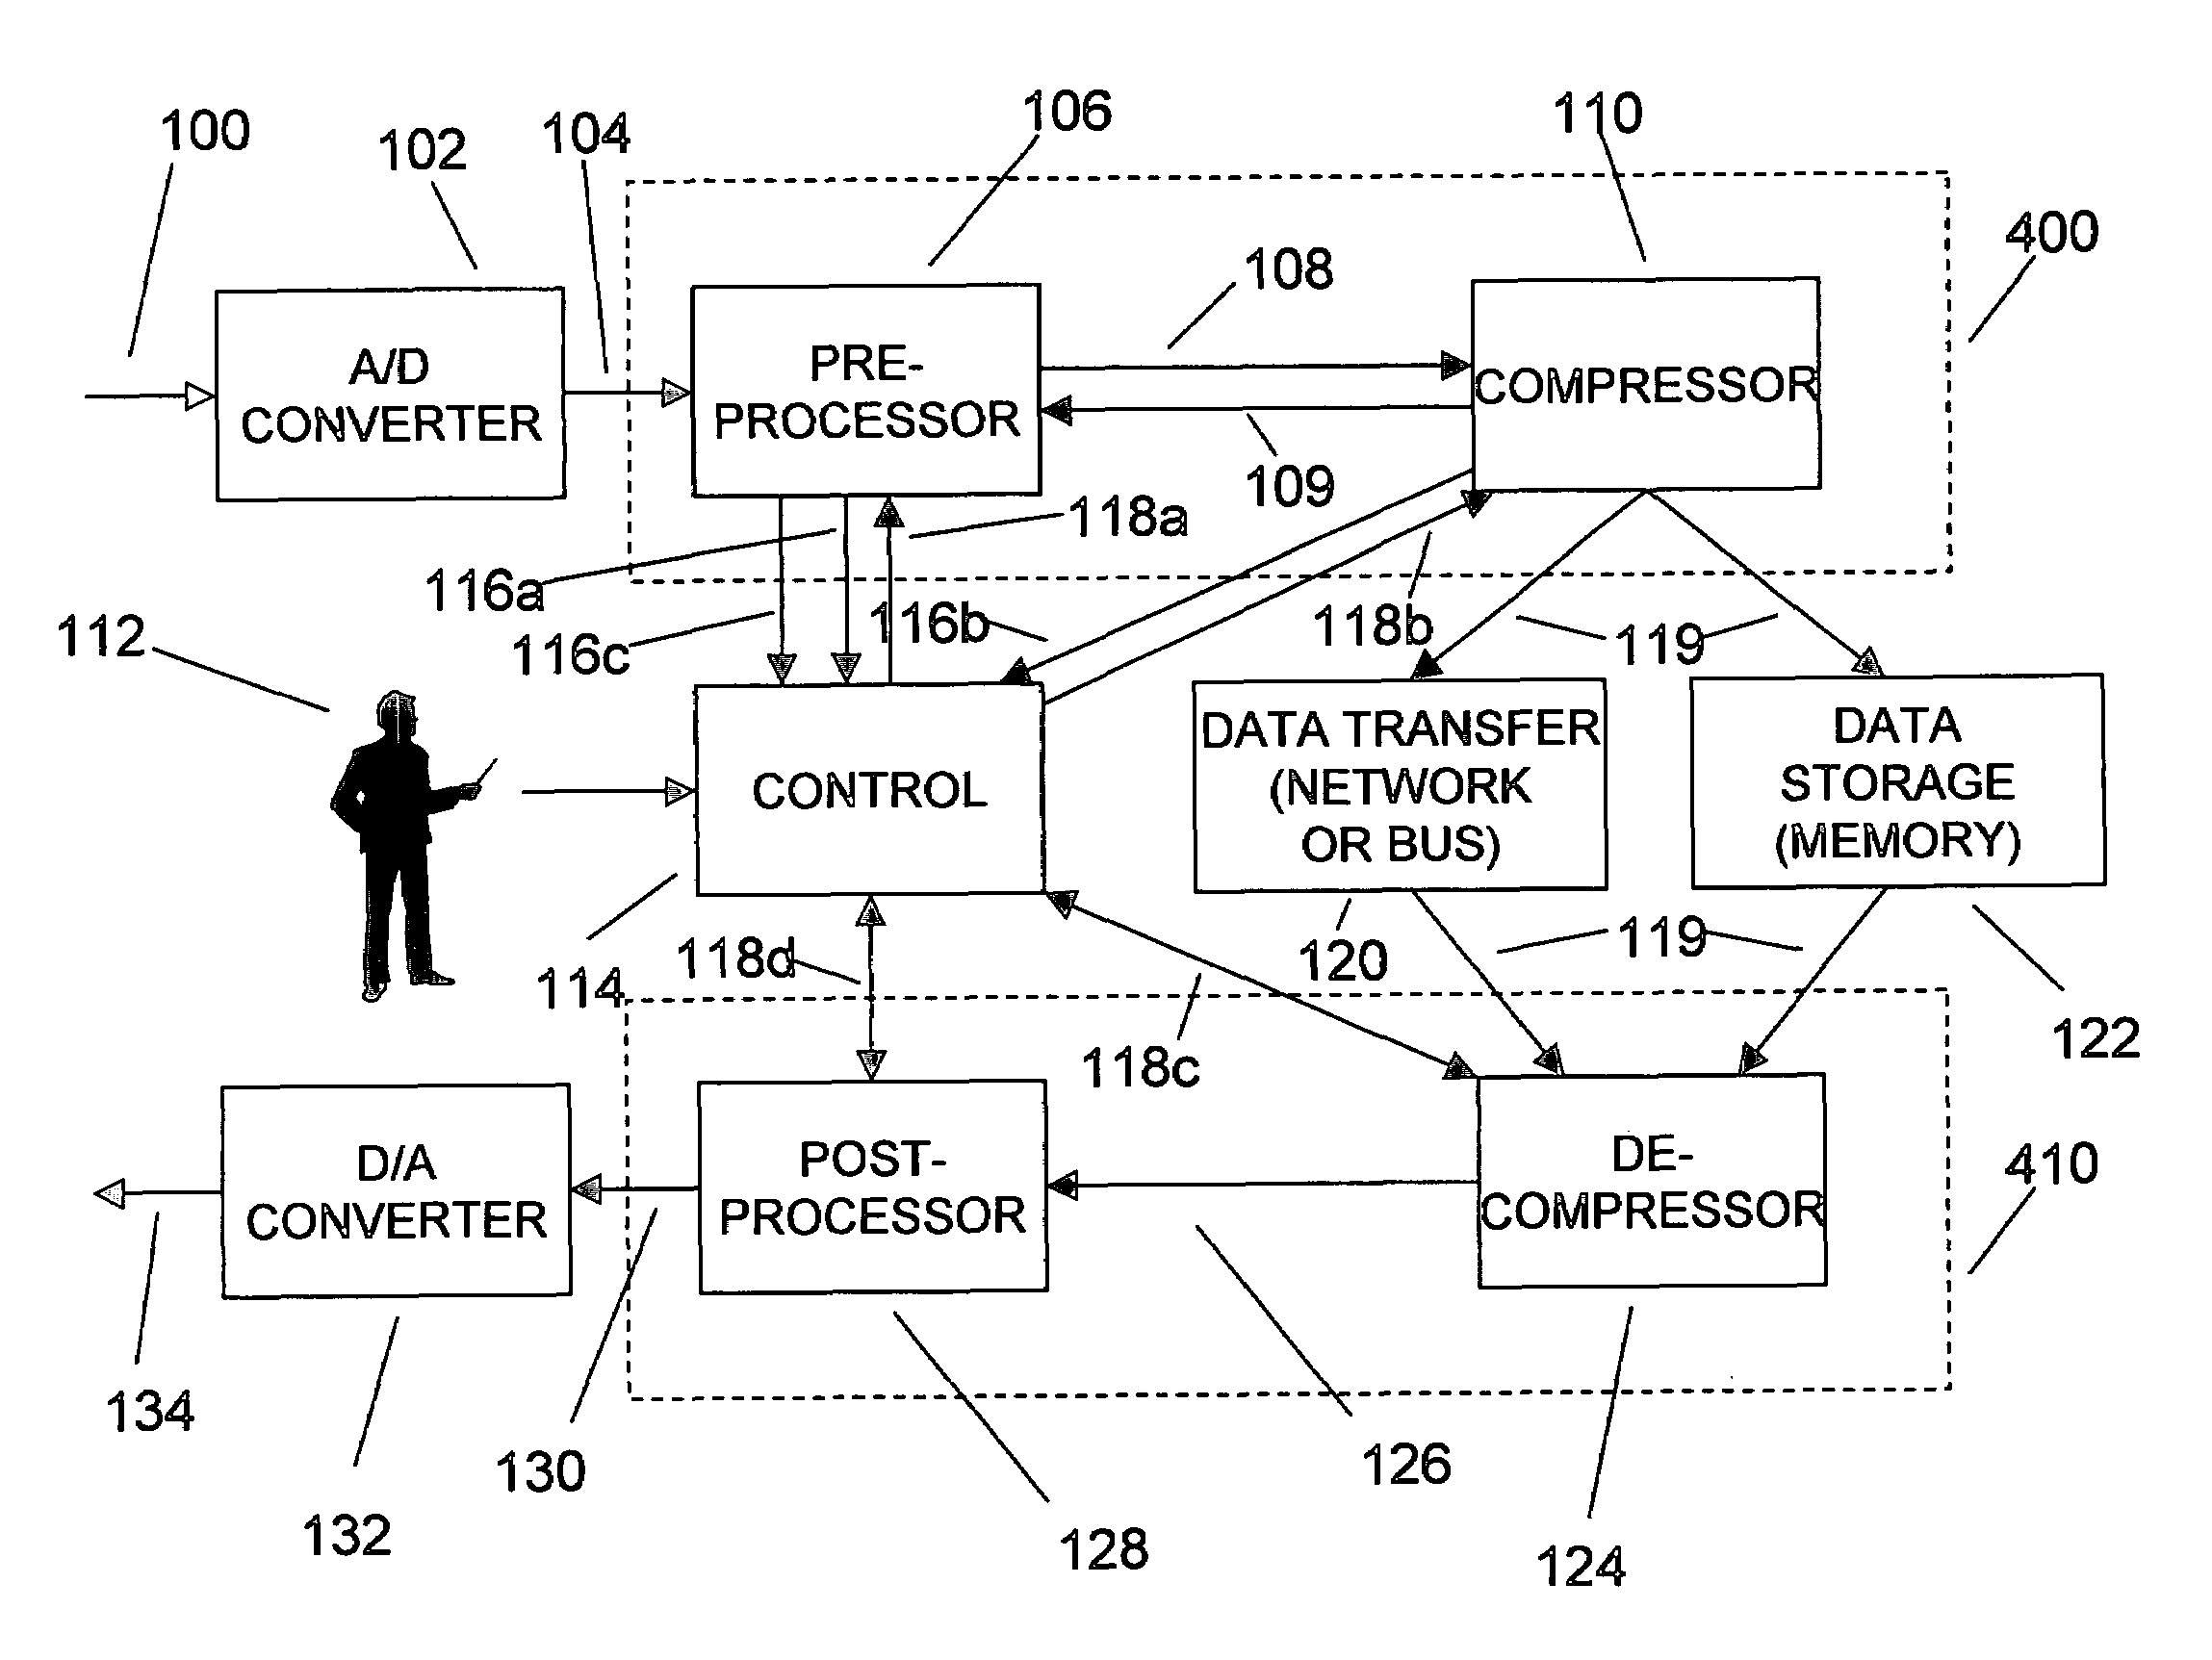 Enhanced test and measurement instruments using compression and decompression